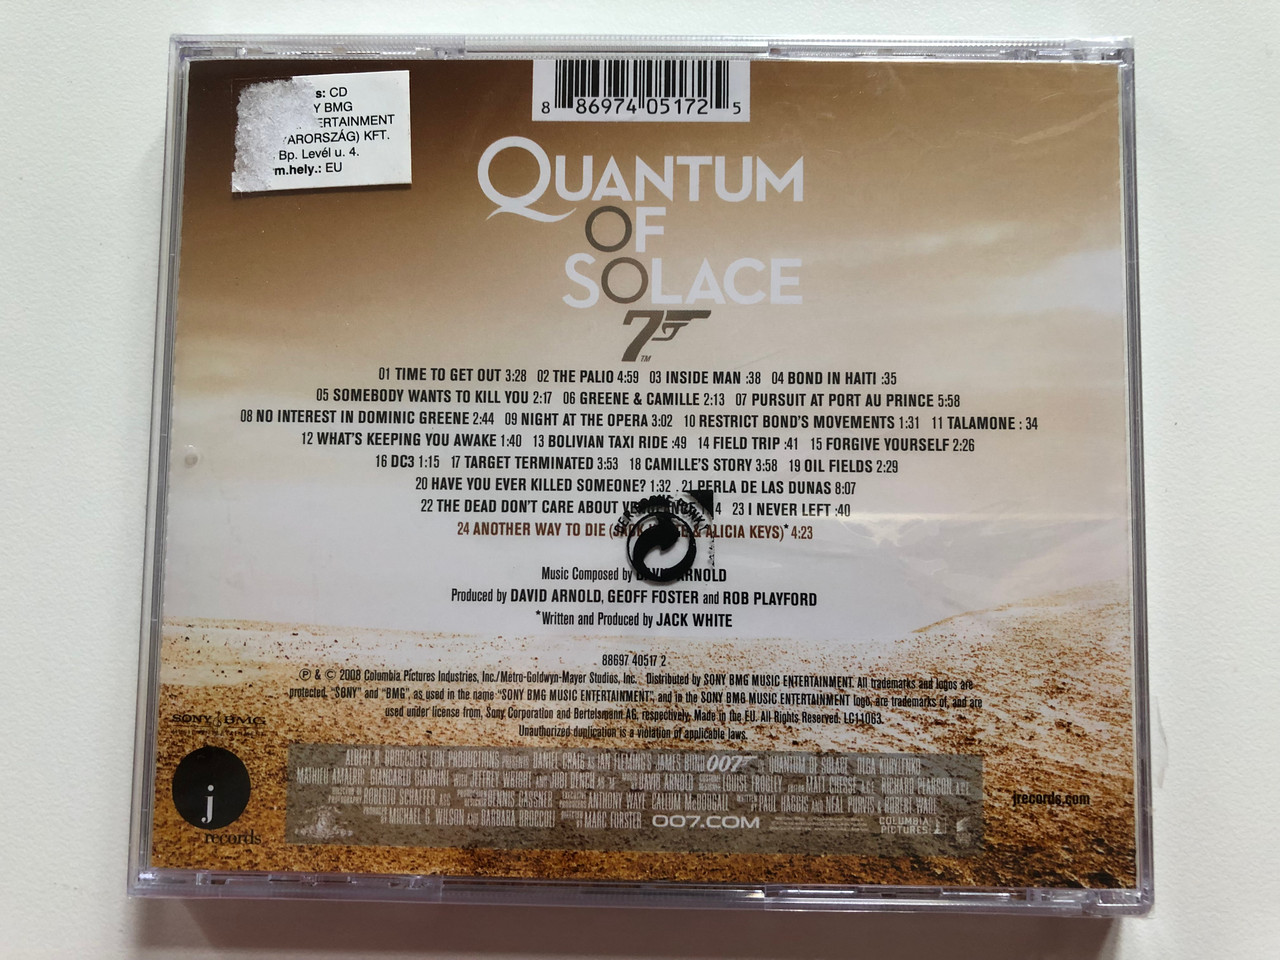 https://cdn10.bigcommerce.com/s-62bdpkt7pb/products/0/images/207051/Quantum_Of_Solace_Original_Motion_Picture_Soundtrack_-_Music_By_David_Arnold_The_Official_Soundtrack_Album_Featuring_The_New_Classic_Another_Way_To_Die_Performed_by_Jack_White_and___46146.1642181061.1280.1280.JPG?c=2&_gl=1*veantc*_ga*MjA2NTIxMjE2MC4xNTkwNTEyNTMy*_ga_WS2VZYPC6G*MTY0MjE3MzQyOC4yNjMuMS4xNjQyMTgwNzI1LjM2